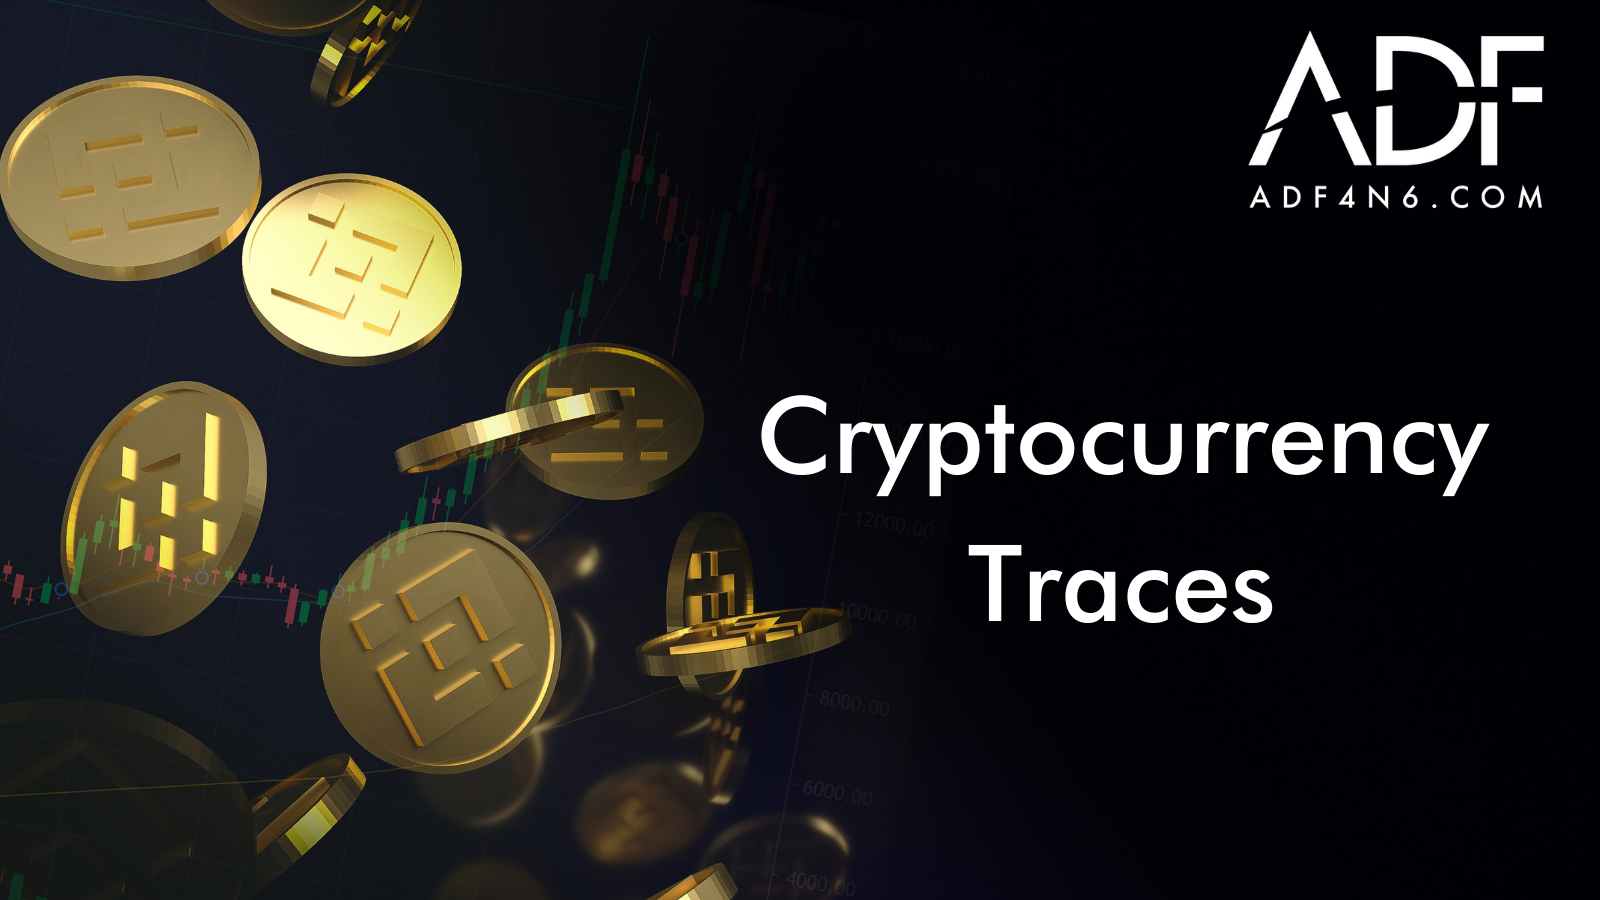 What Are Cryptocurrency Traces?